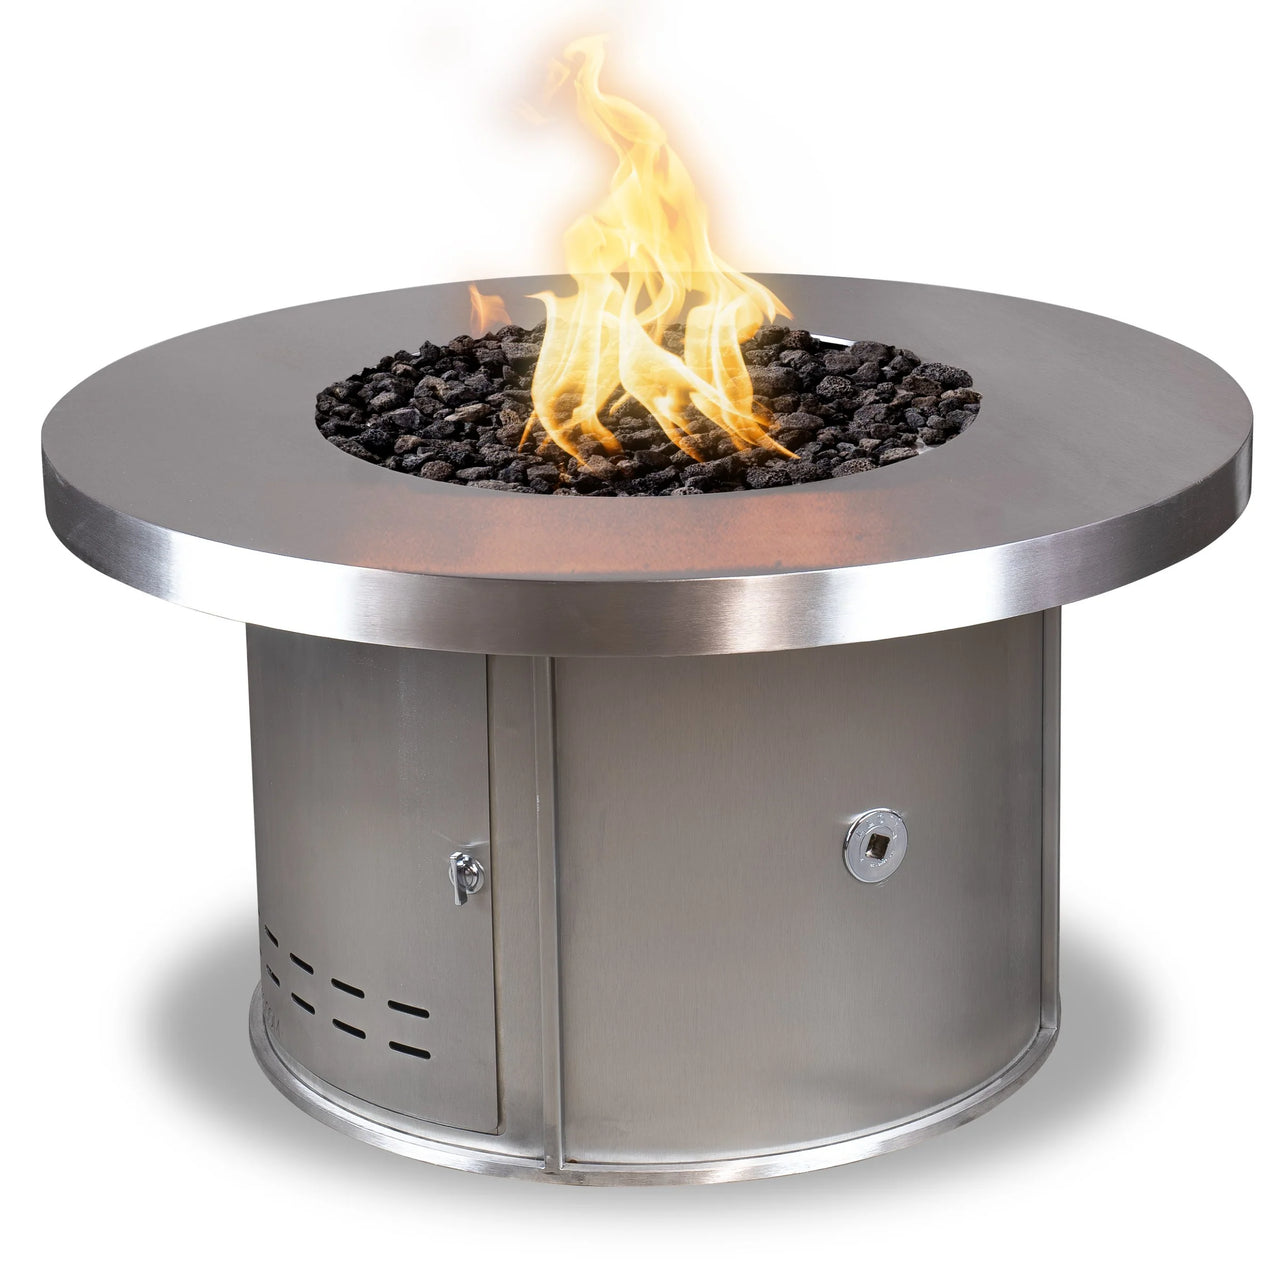 The Outdoor Plus 36" Round Mabel Stainless Steel Fire Table